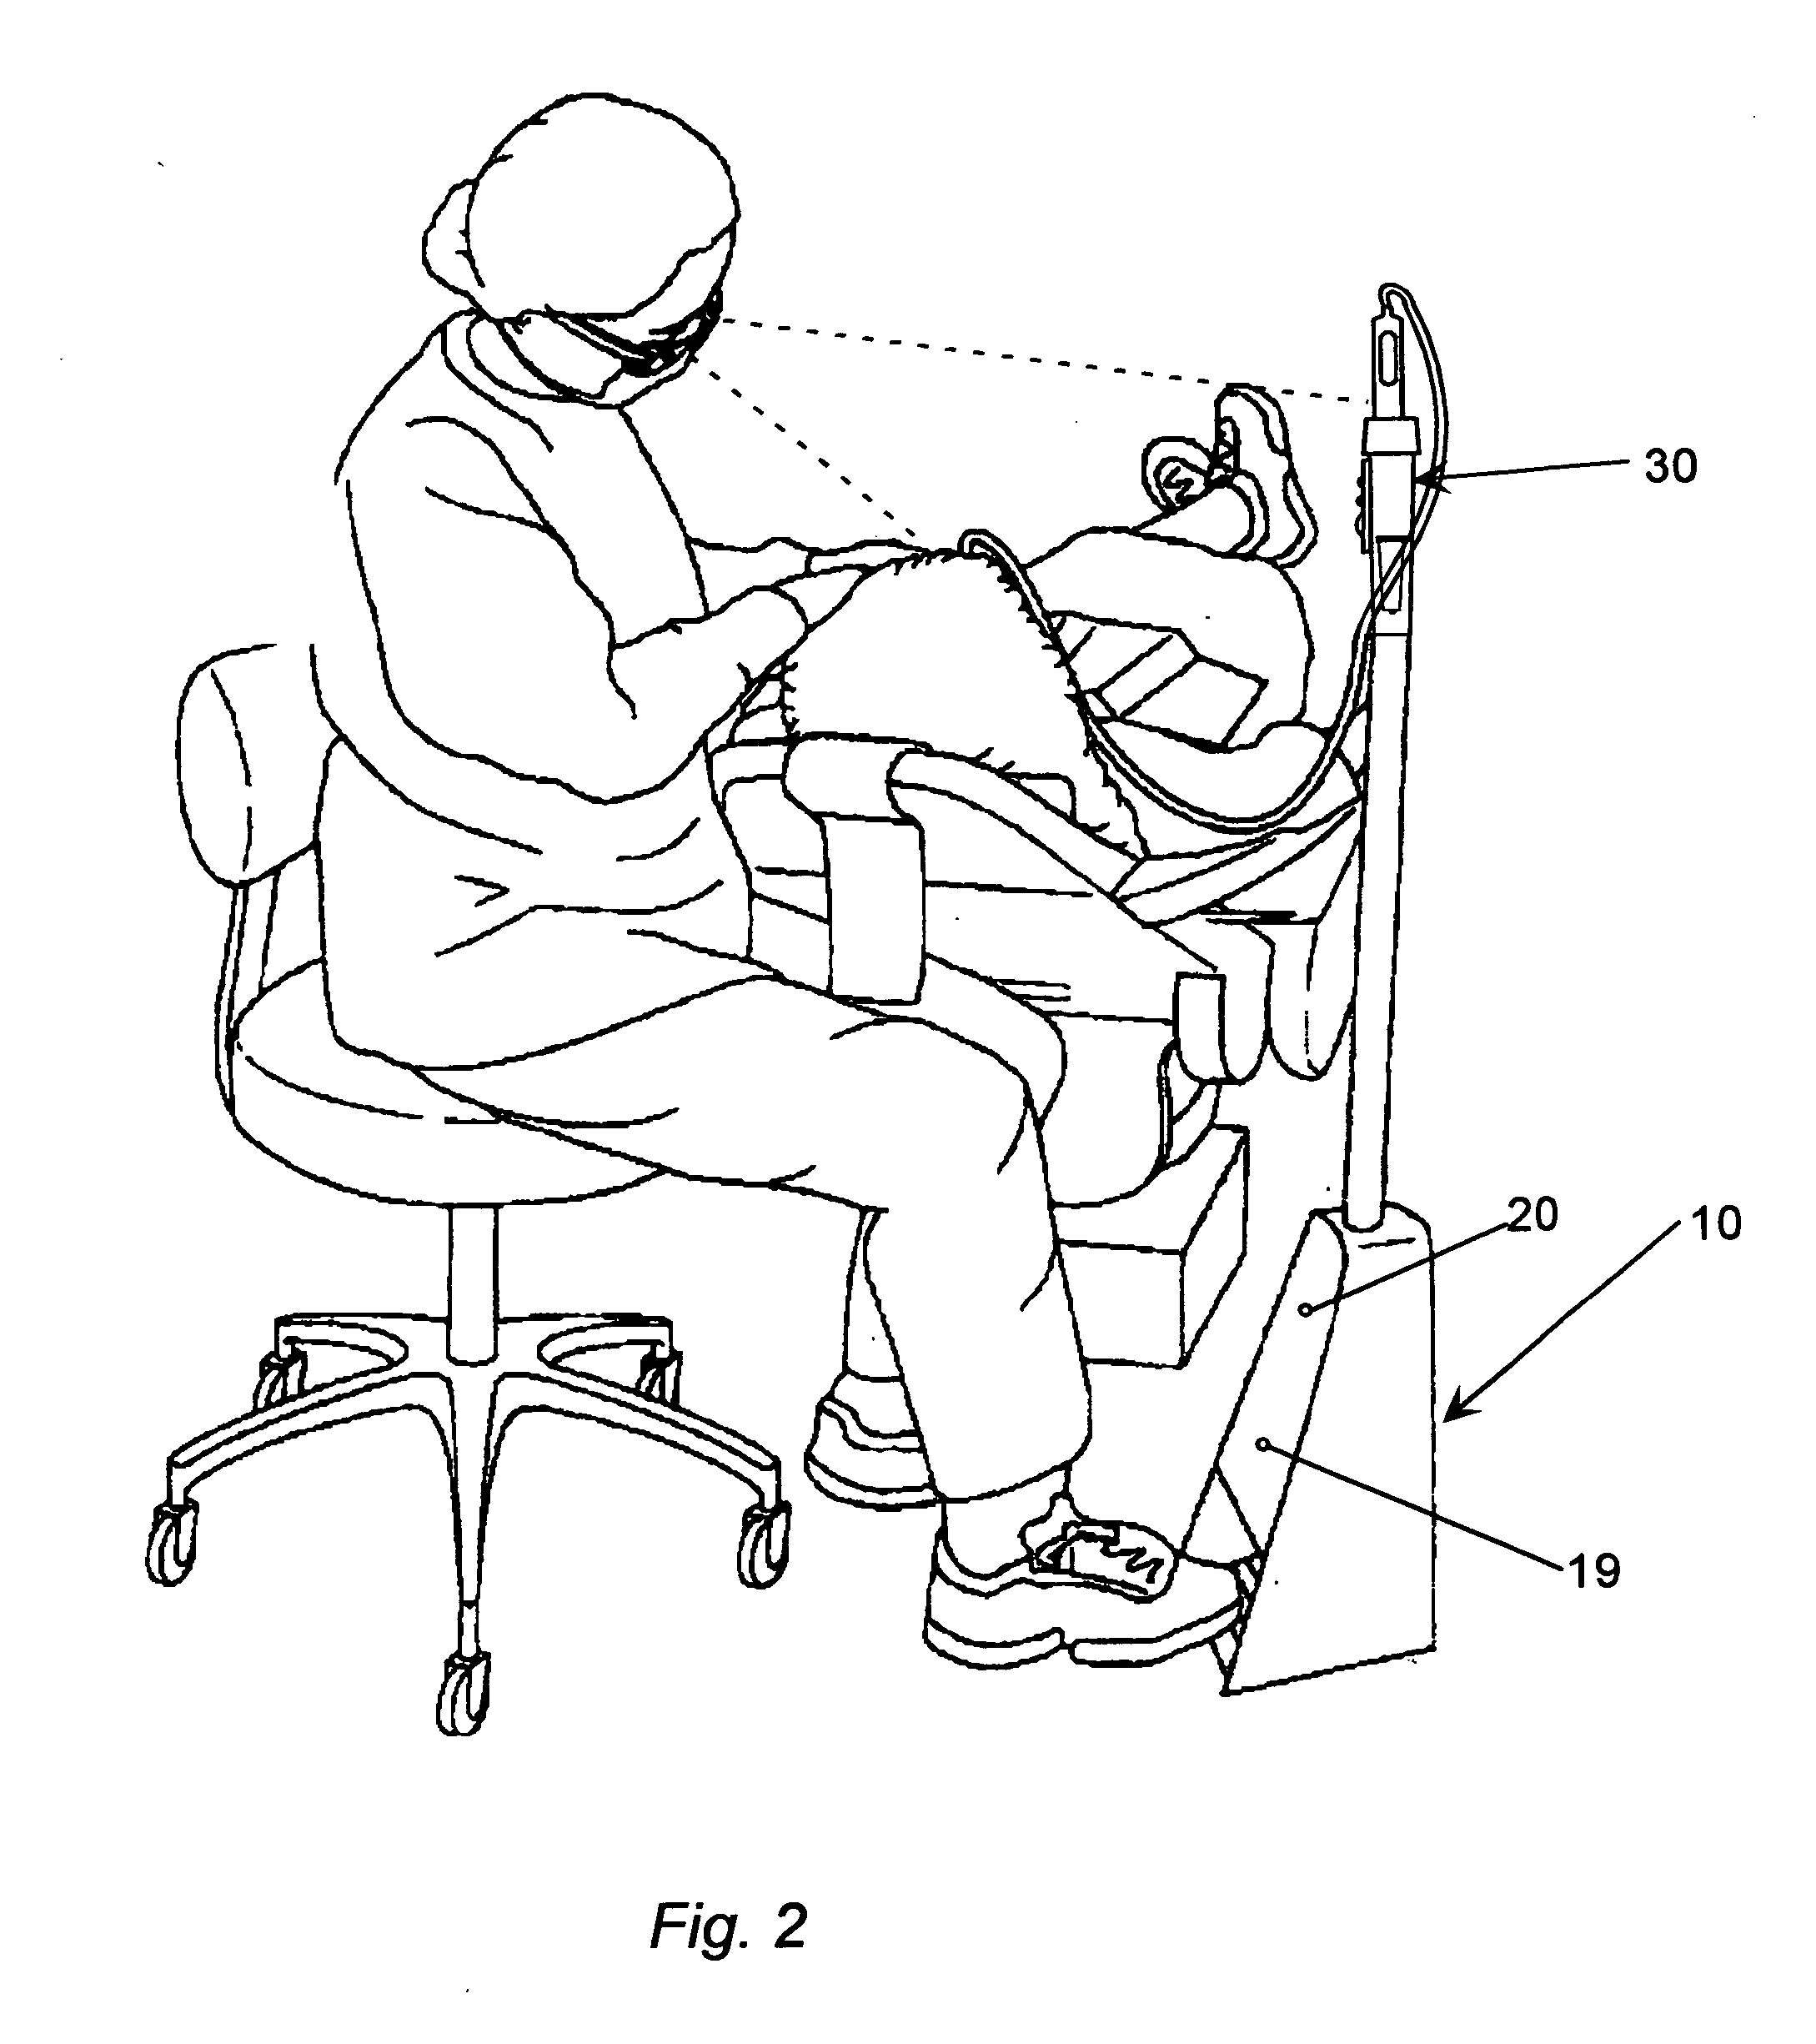 Dental anesthetic injection apparatus and methods for administering dental injections